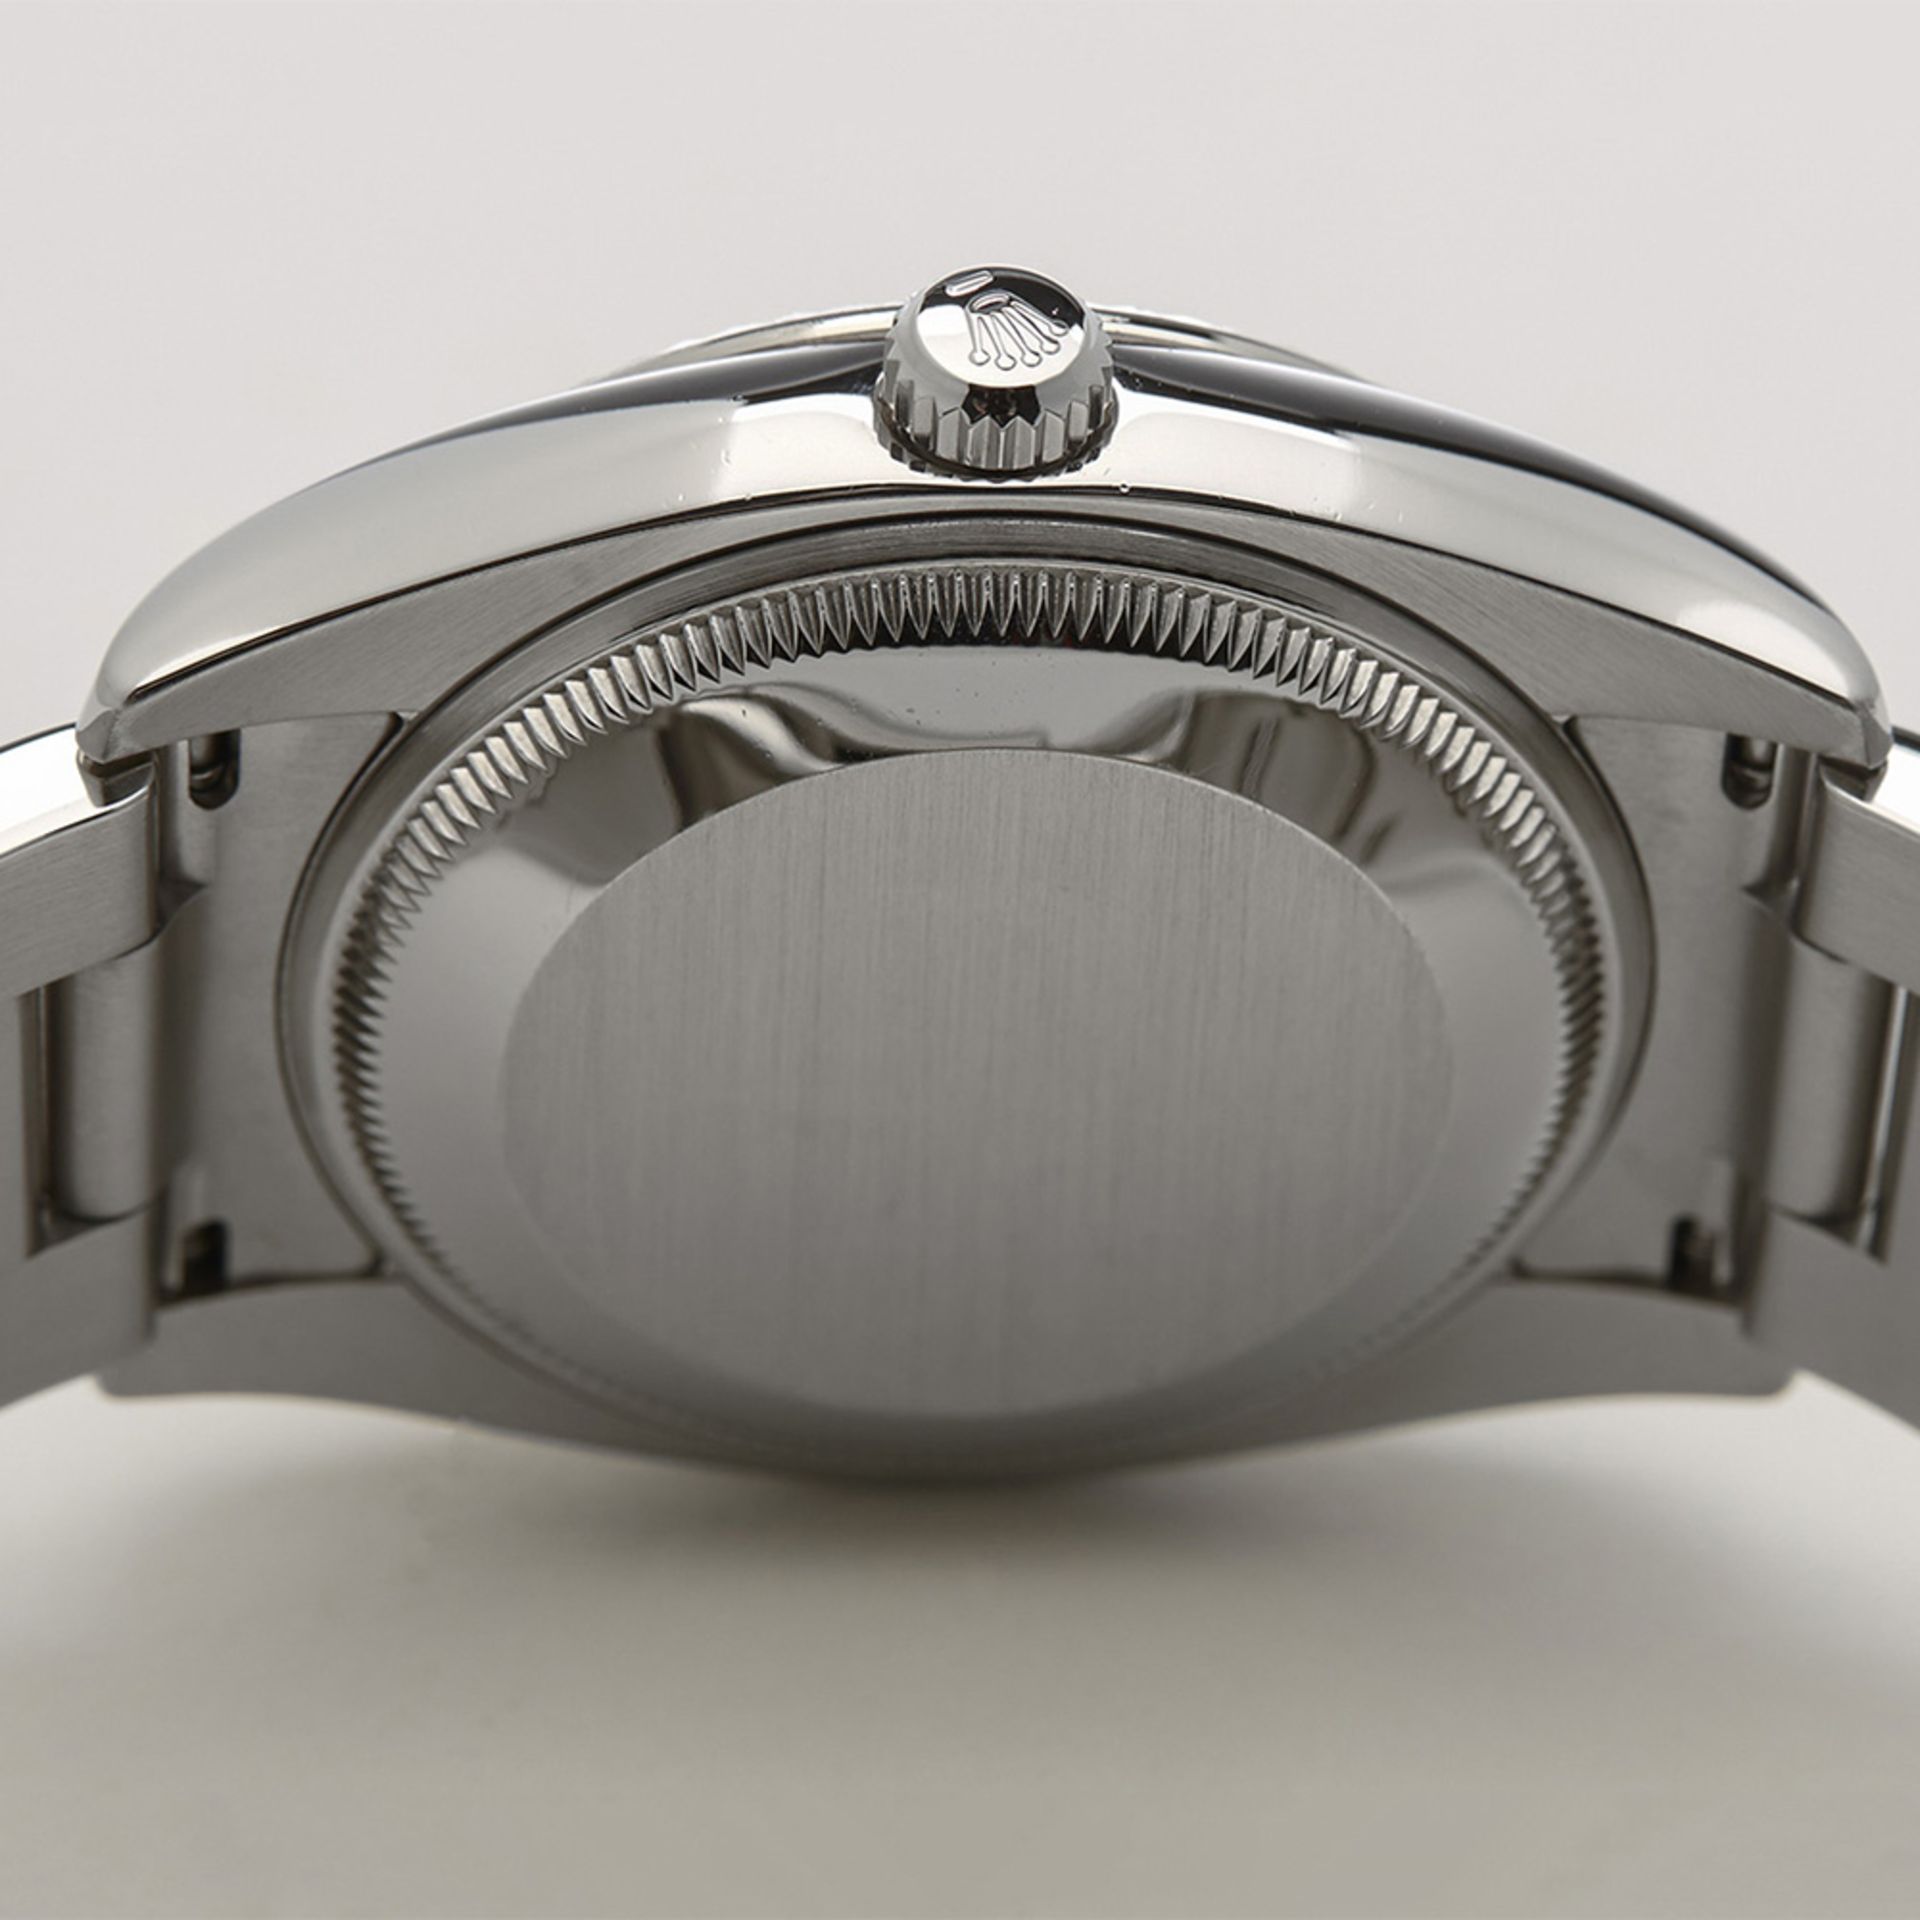 Oyster Perpetual Date 34mm Stainless Steel - 115234 - Image 8 of 9